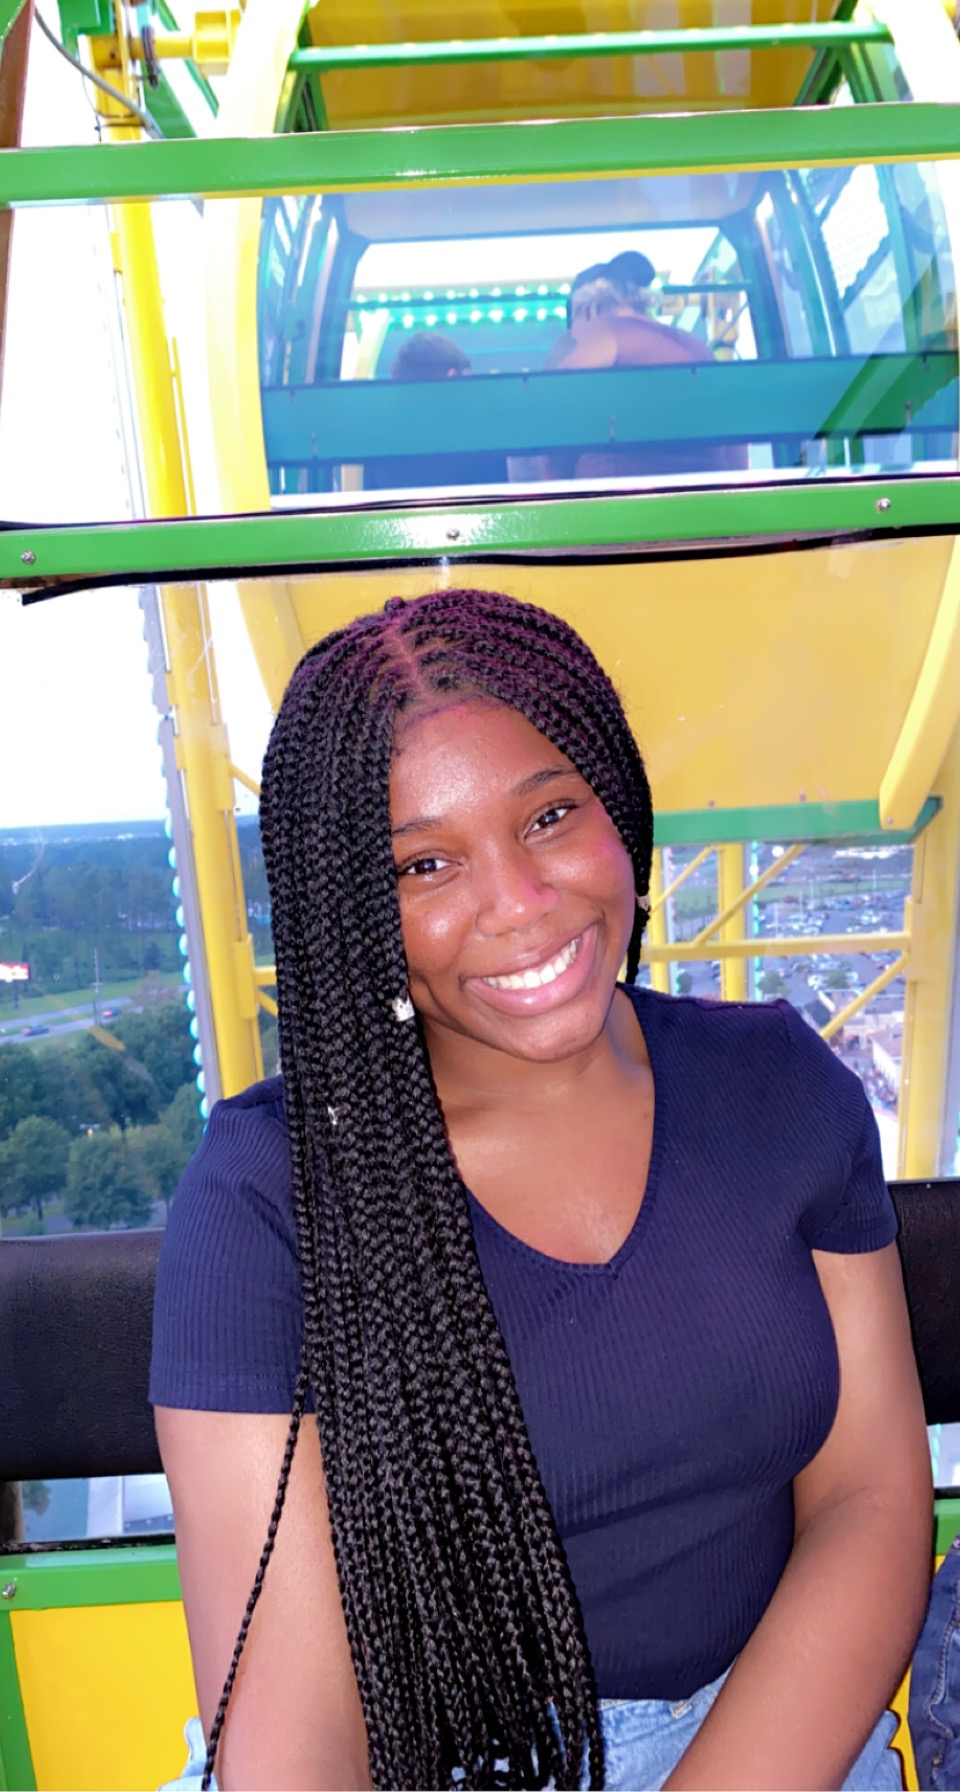 Esther smiling on a ferris wheel